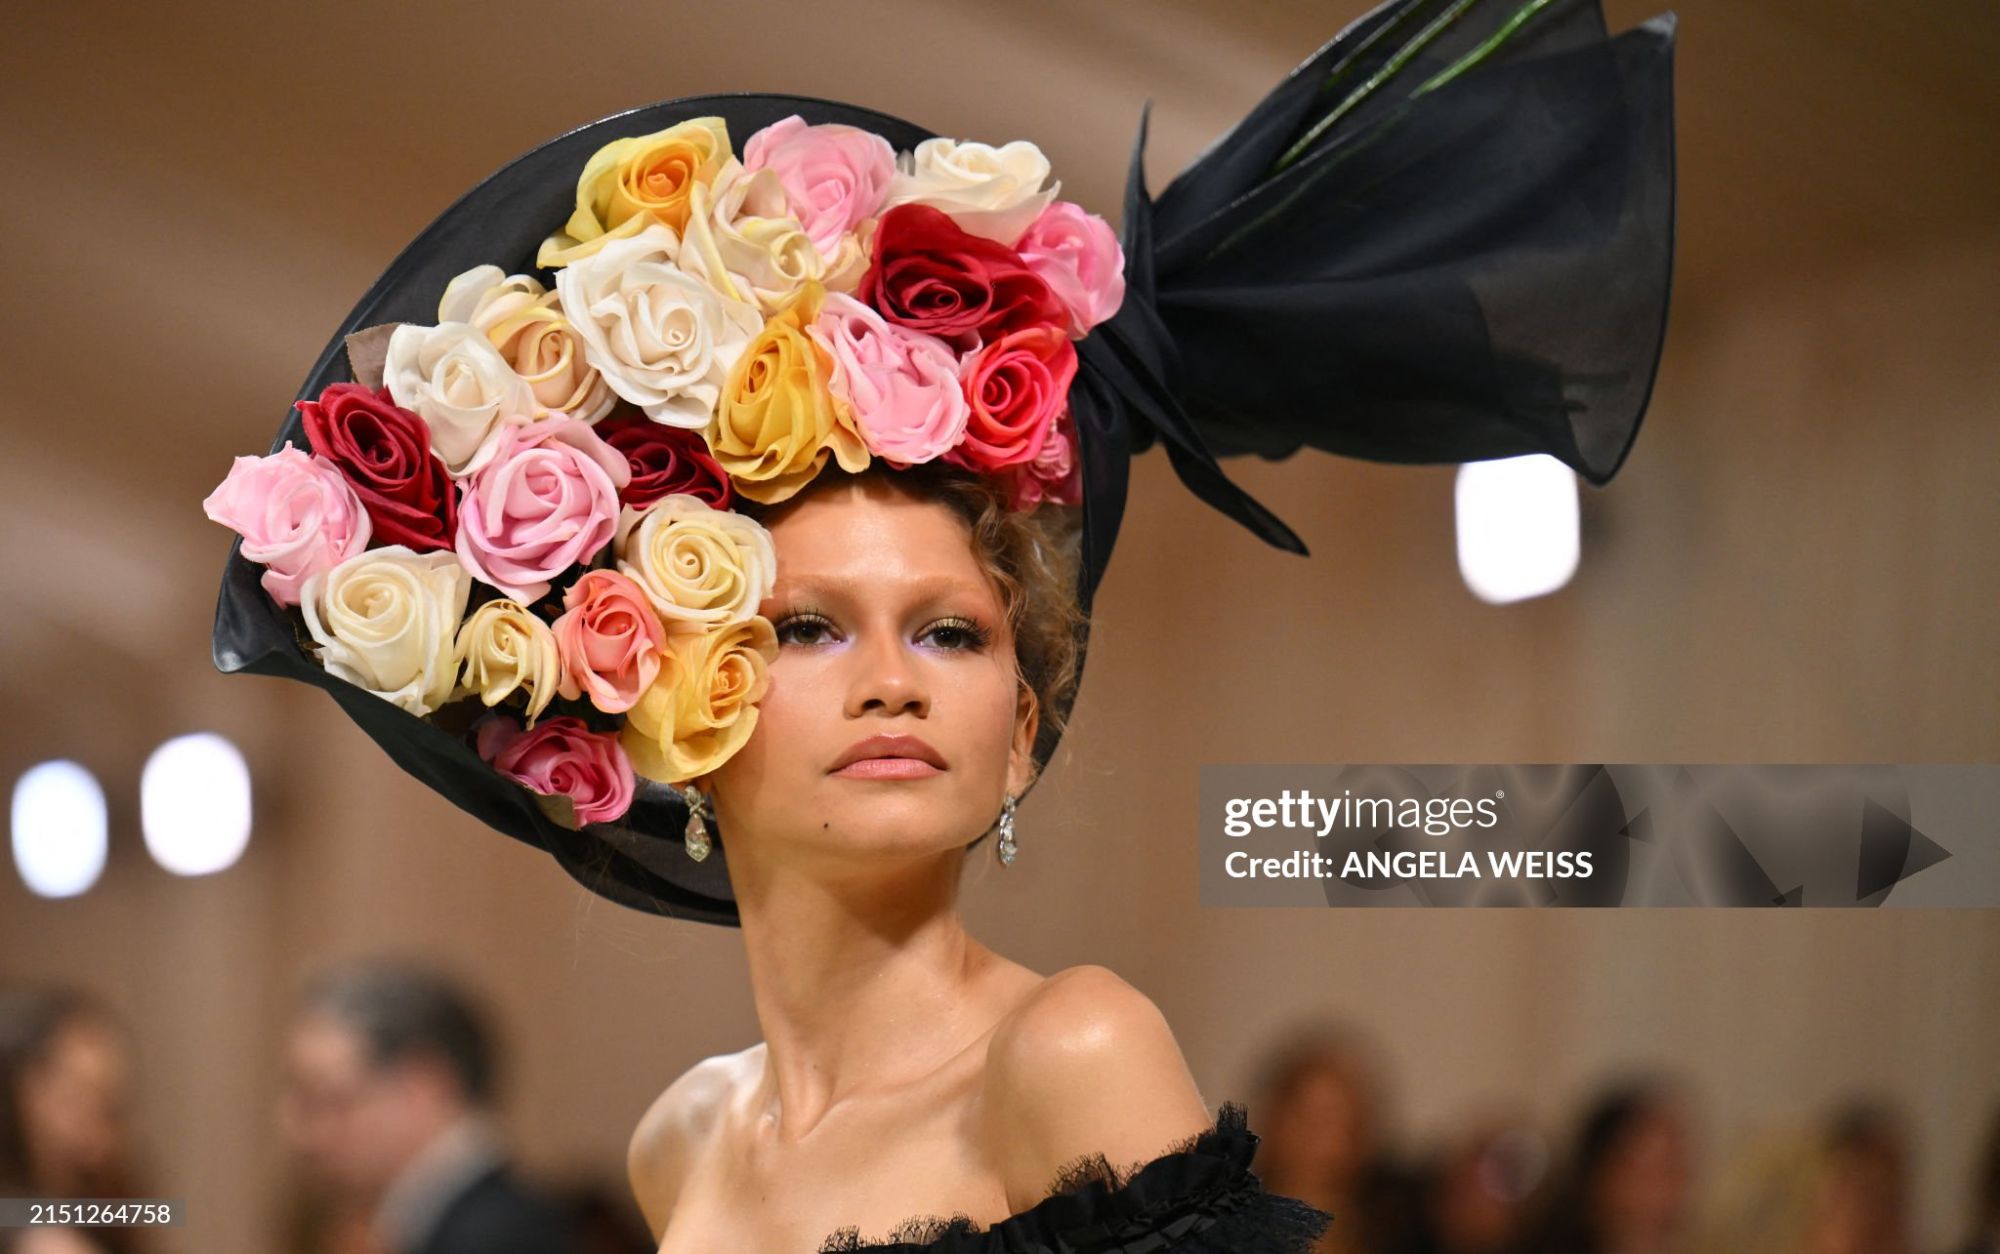 gettyimages-2151264758-2048x2048.jpg